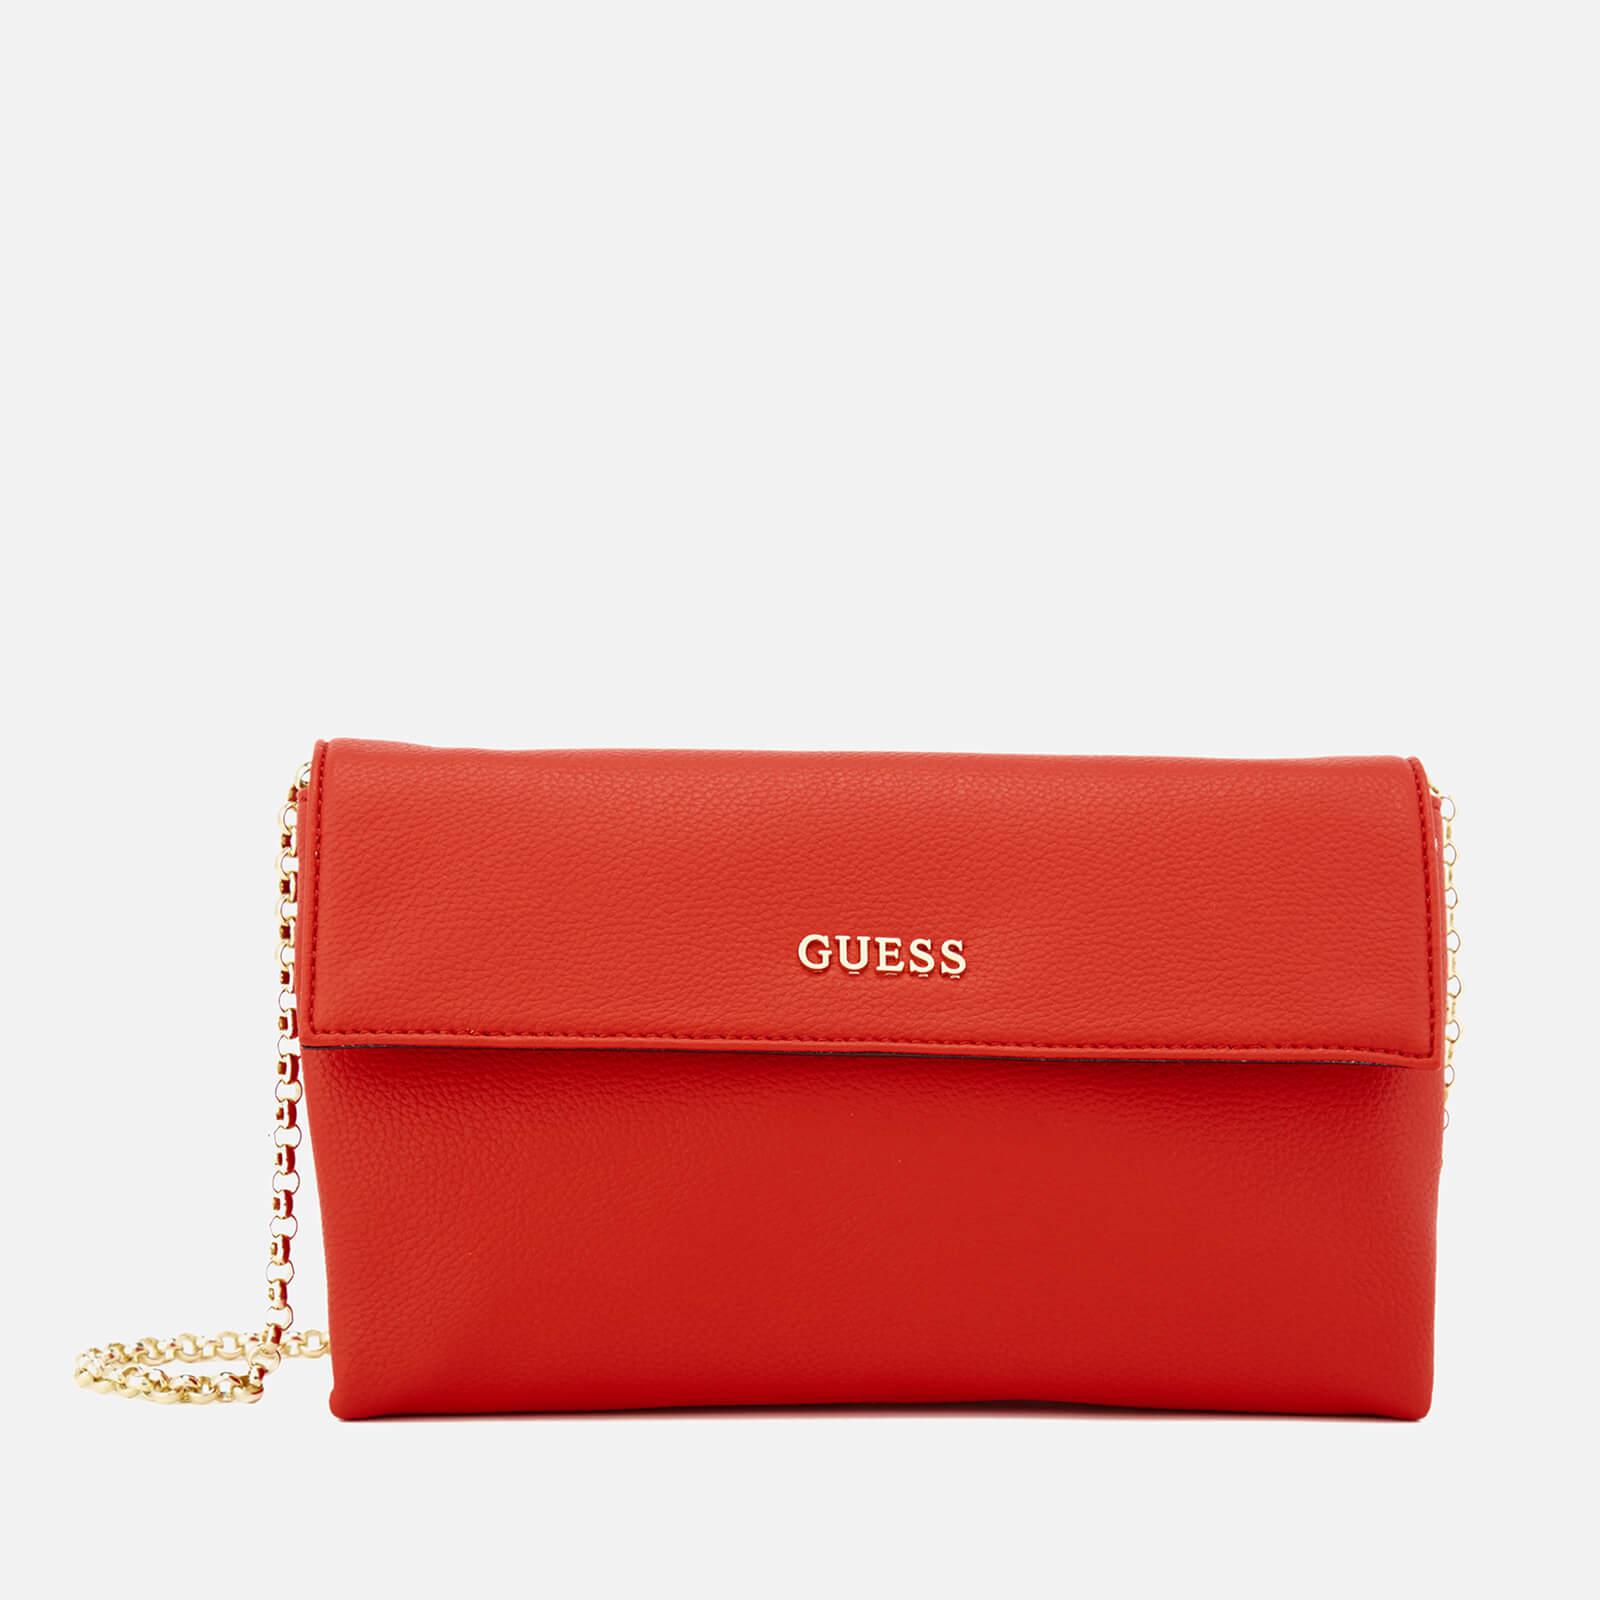 Guess Tulip Envelope Clutch Bag in Red - Lyst